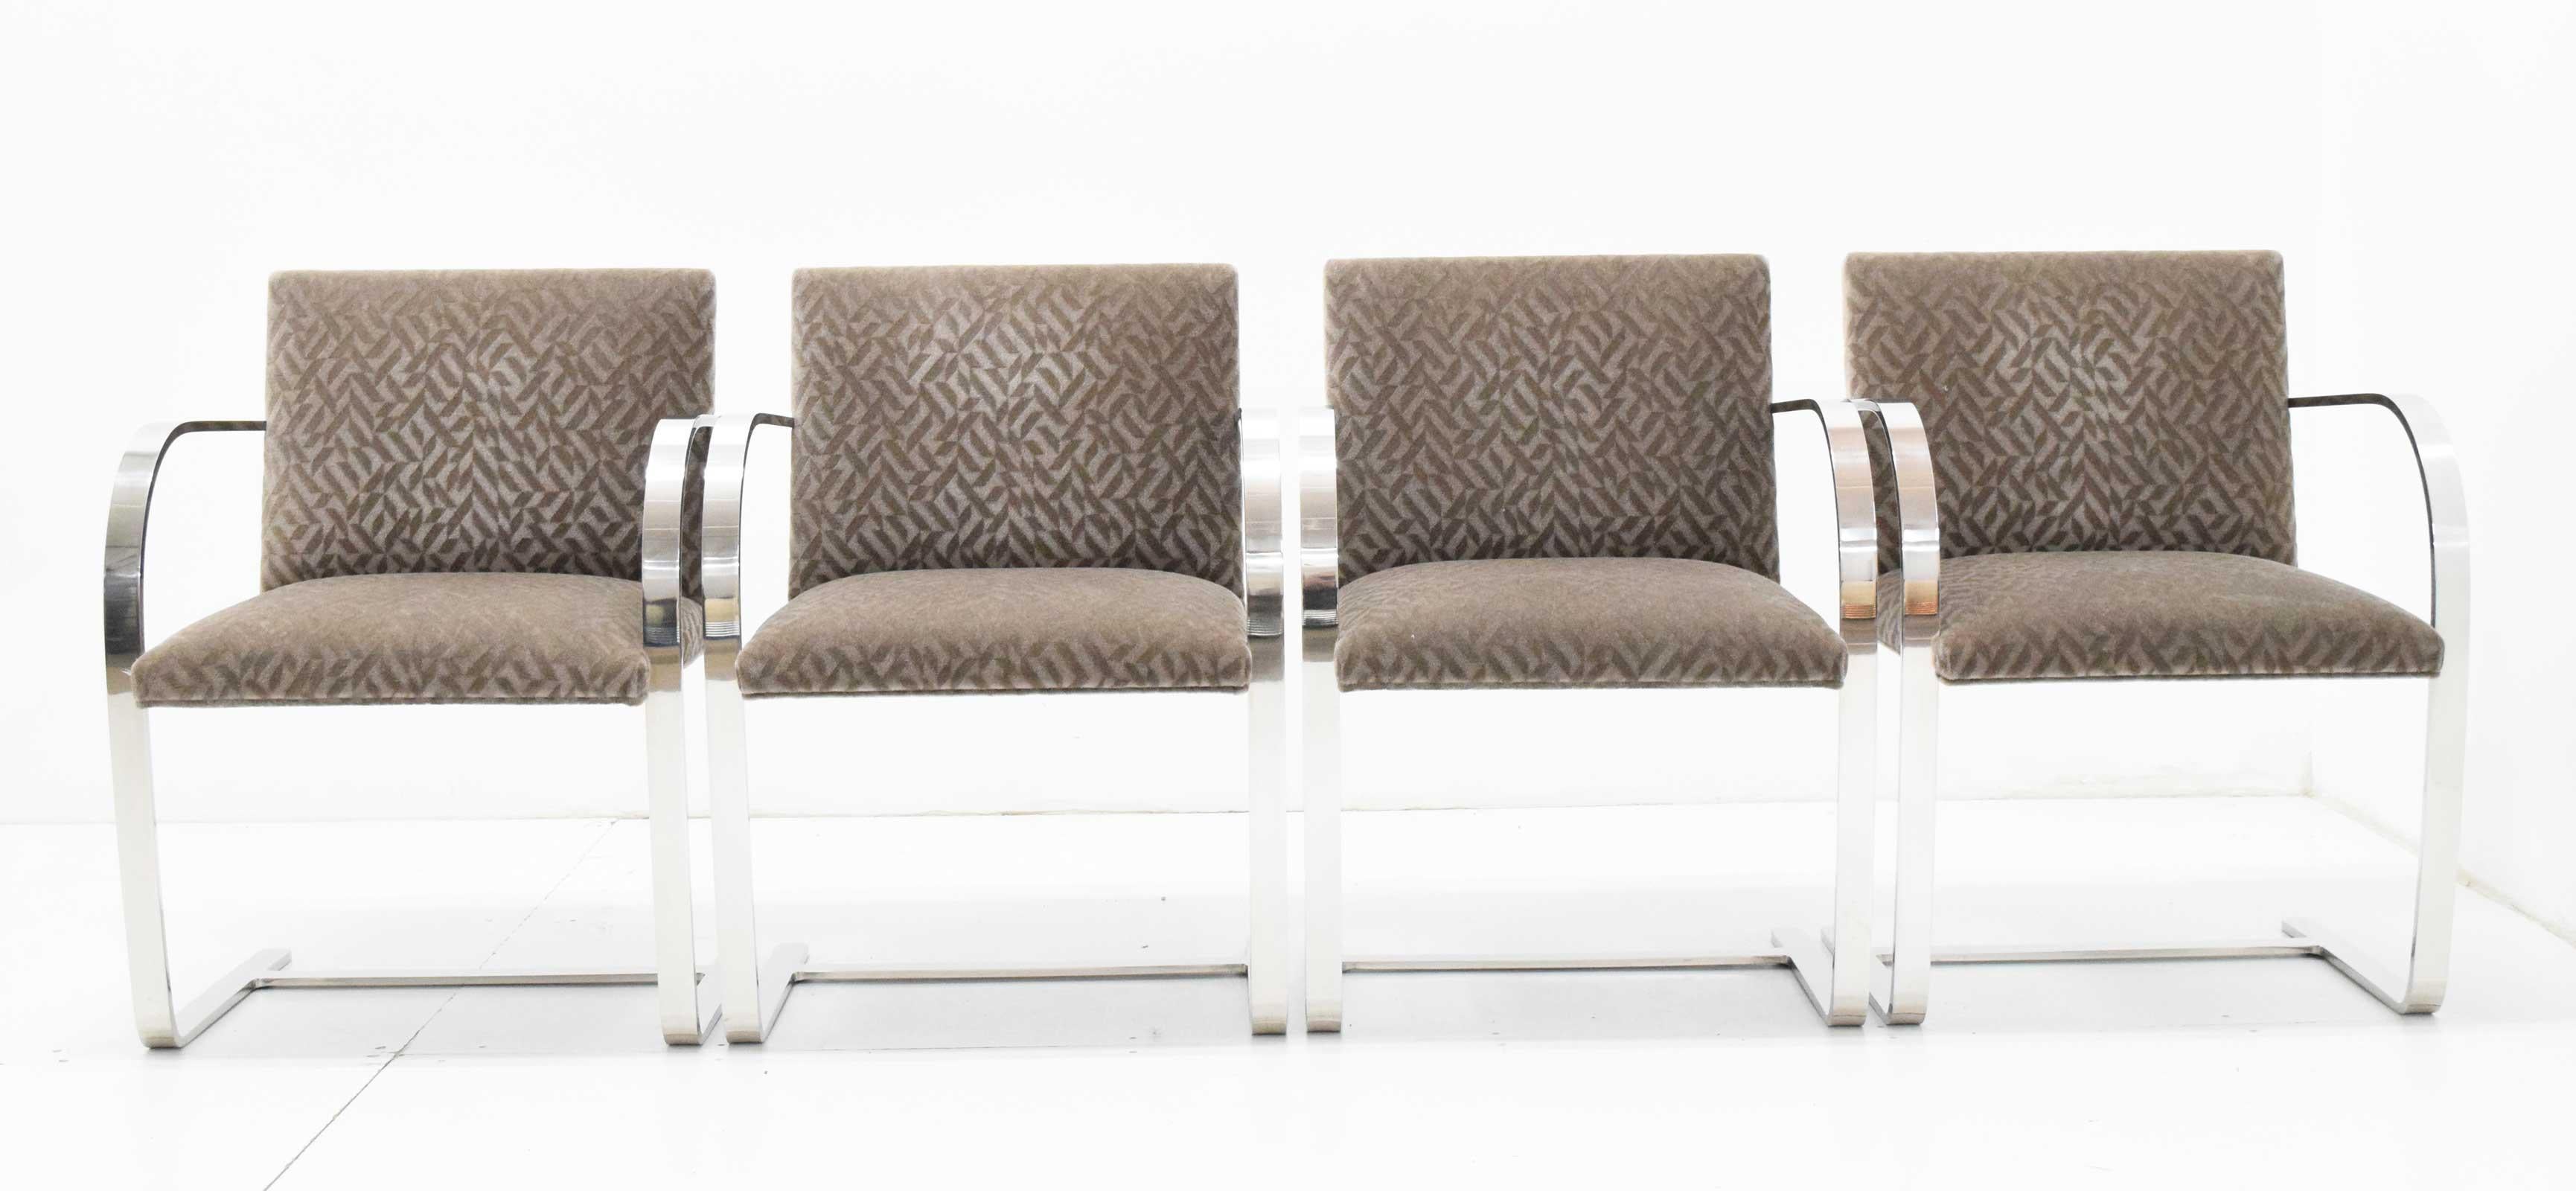 Beautiful set of Mies van der Rohe Brno chairs in a mohair. Stainless steel frames. Beautiful condition.